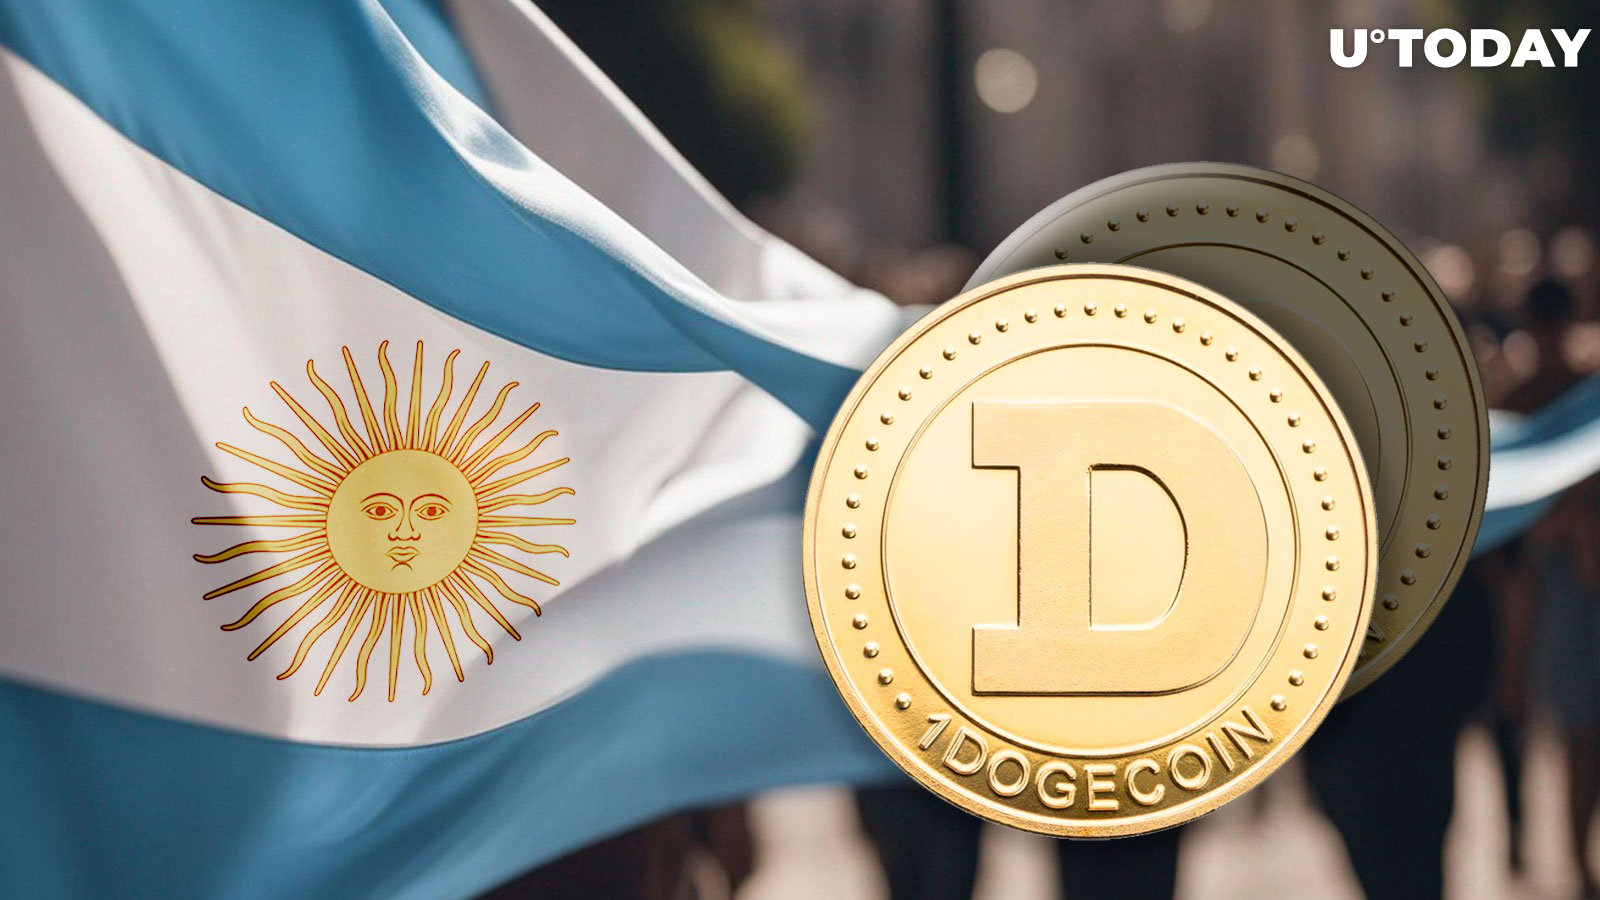 Dogecoin Creator: Argentina Adopting DOGE? That Would Be a Laugh